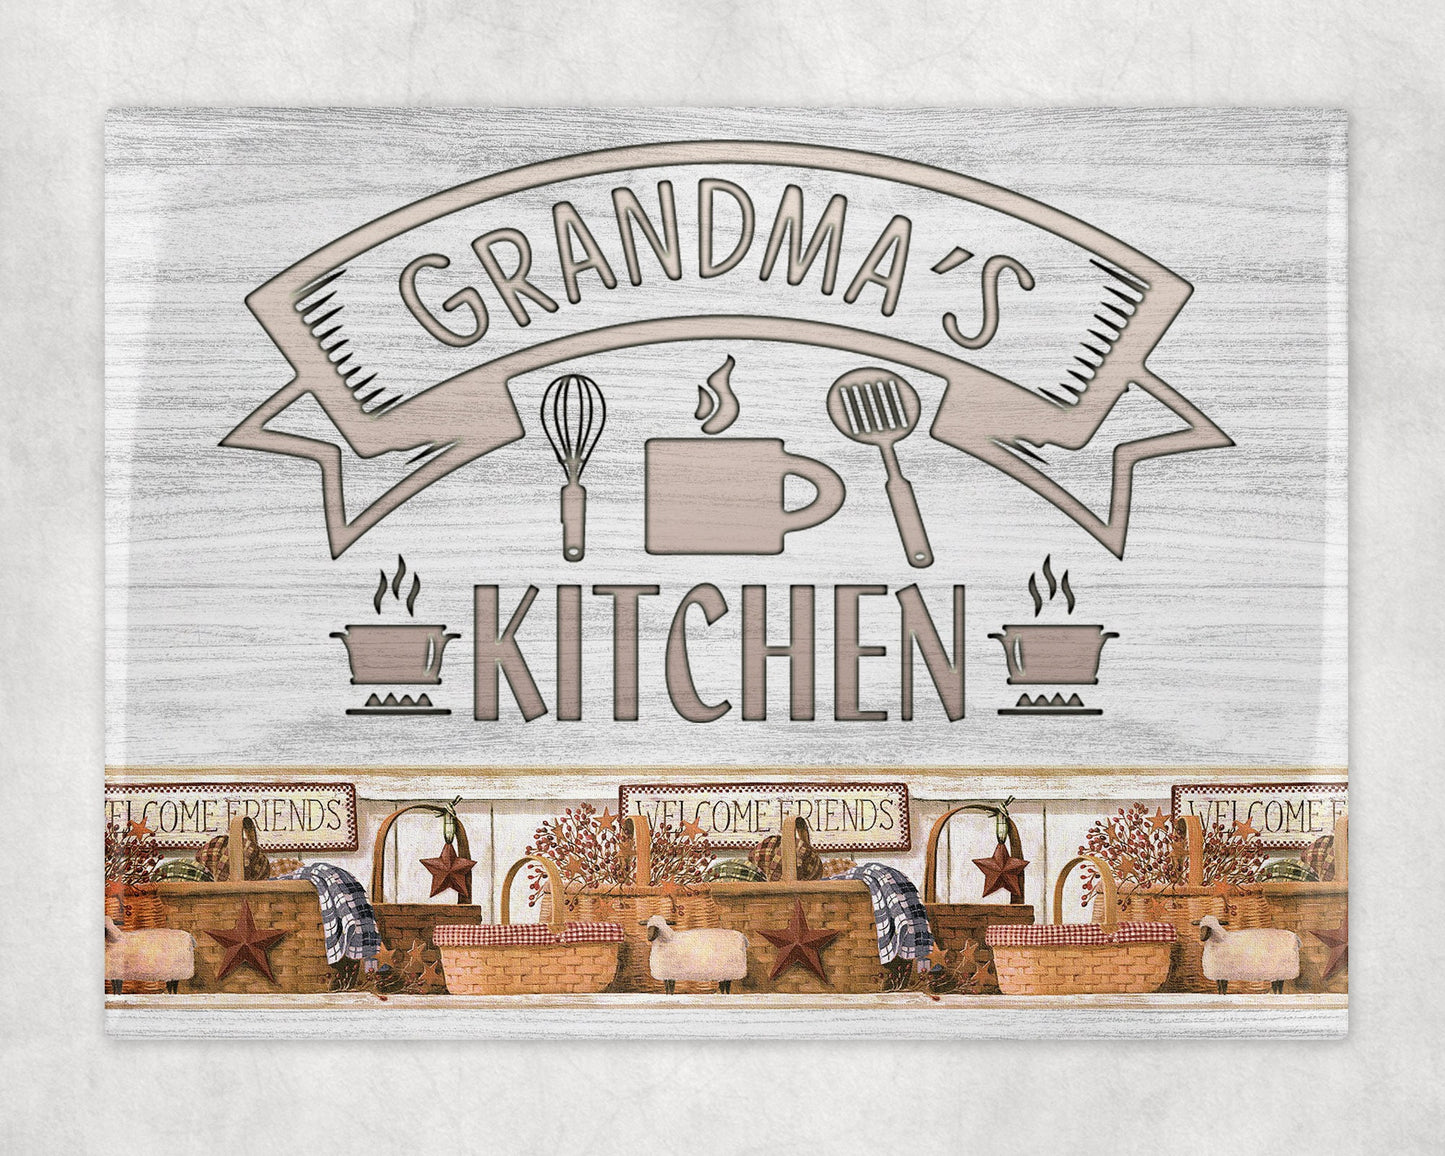 Grandma's Kitchen Farmhouse Art Decorative Ceramic Tile with Optional Easel Back - 6x8 inches